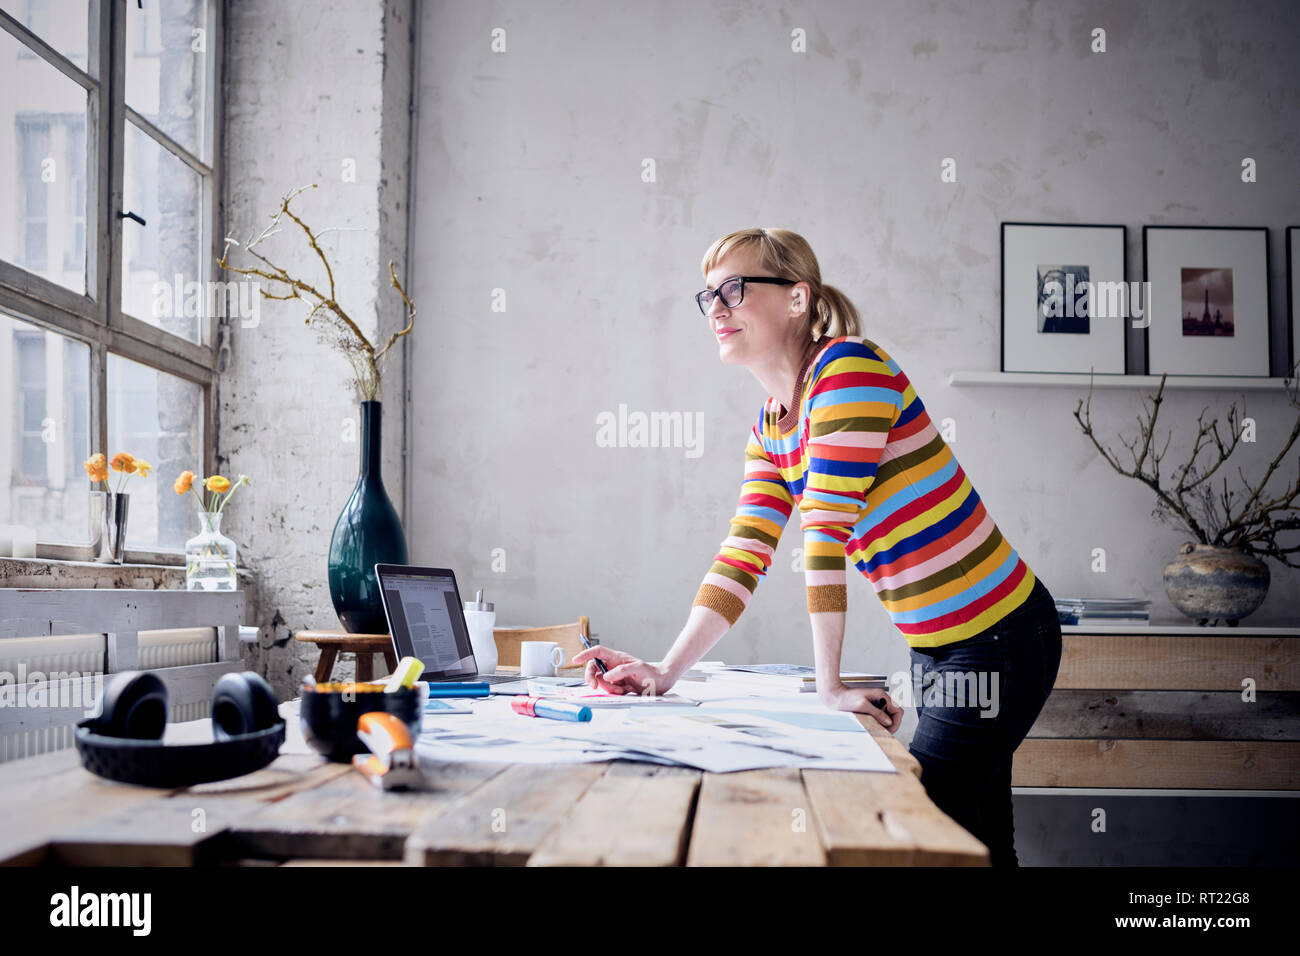 Portrait of smiling woman standing at desk in a loft looking through window Stock Photo